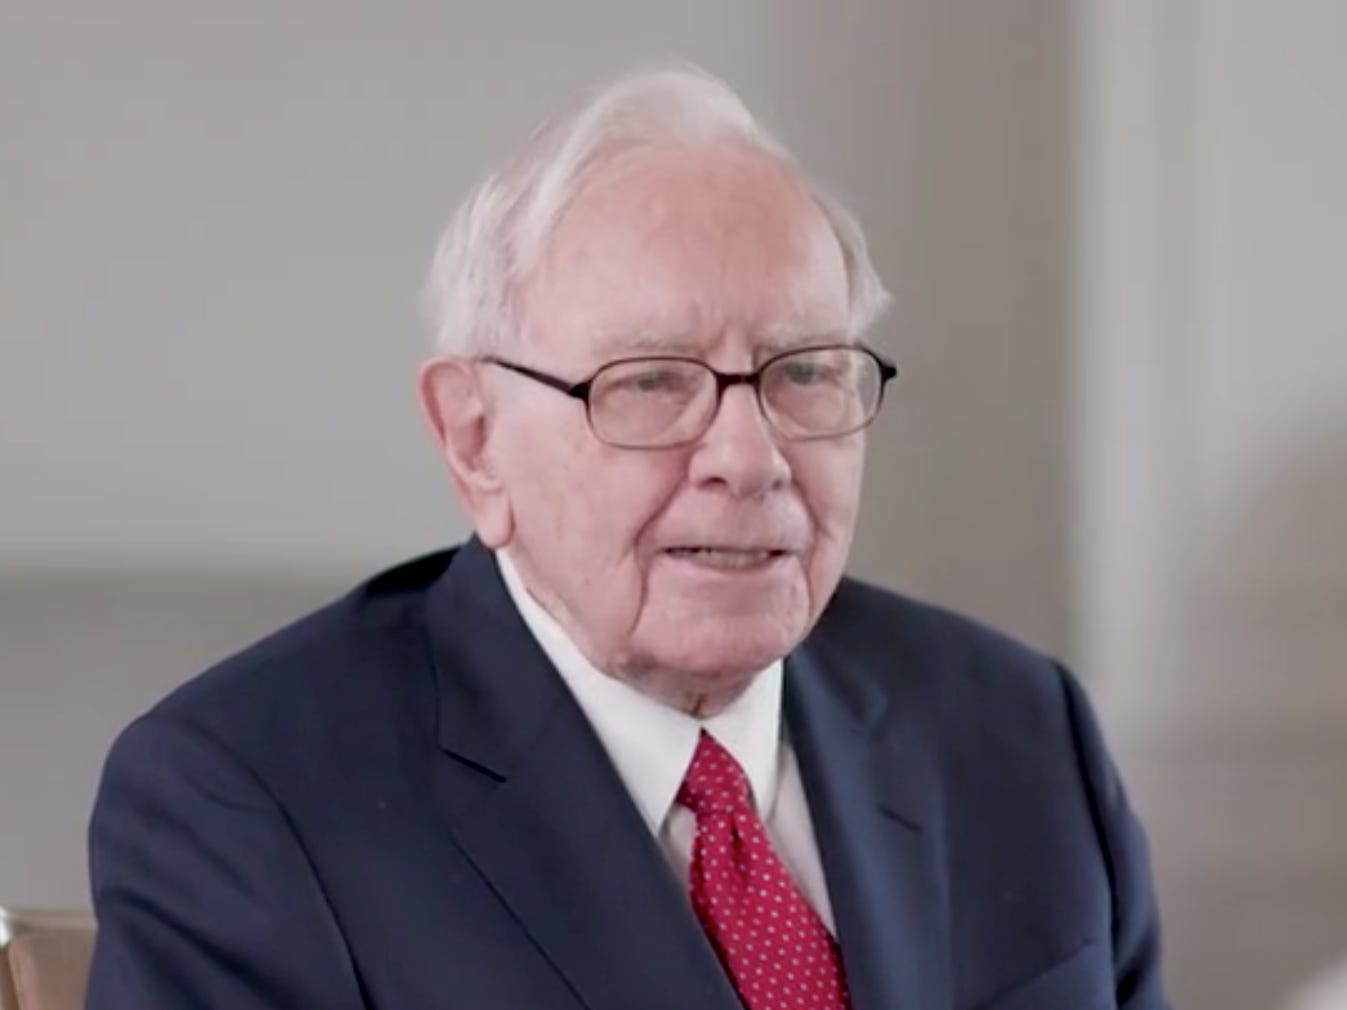 microsoft, warren buffett's real-estate firm will spend $250m to get out of legal hot water